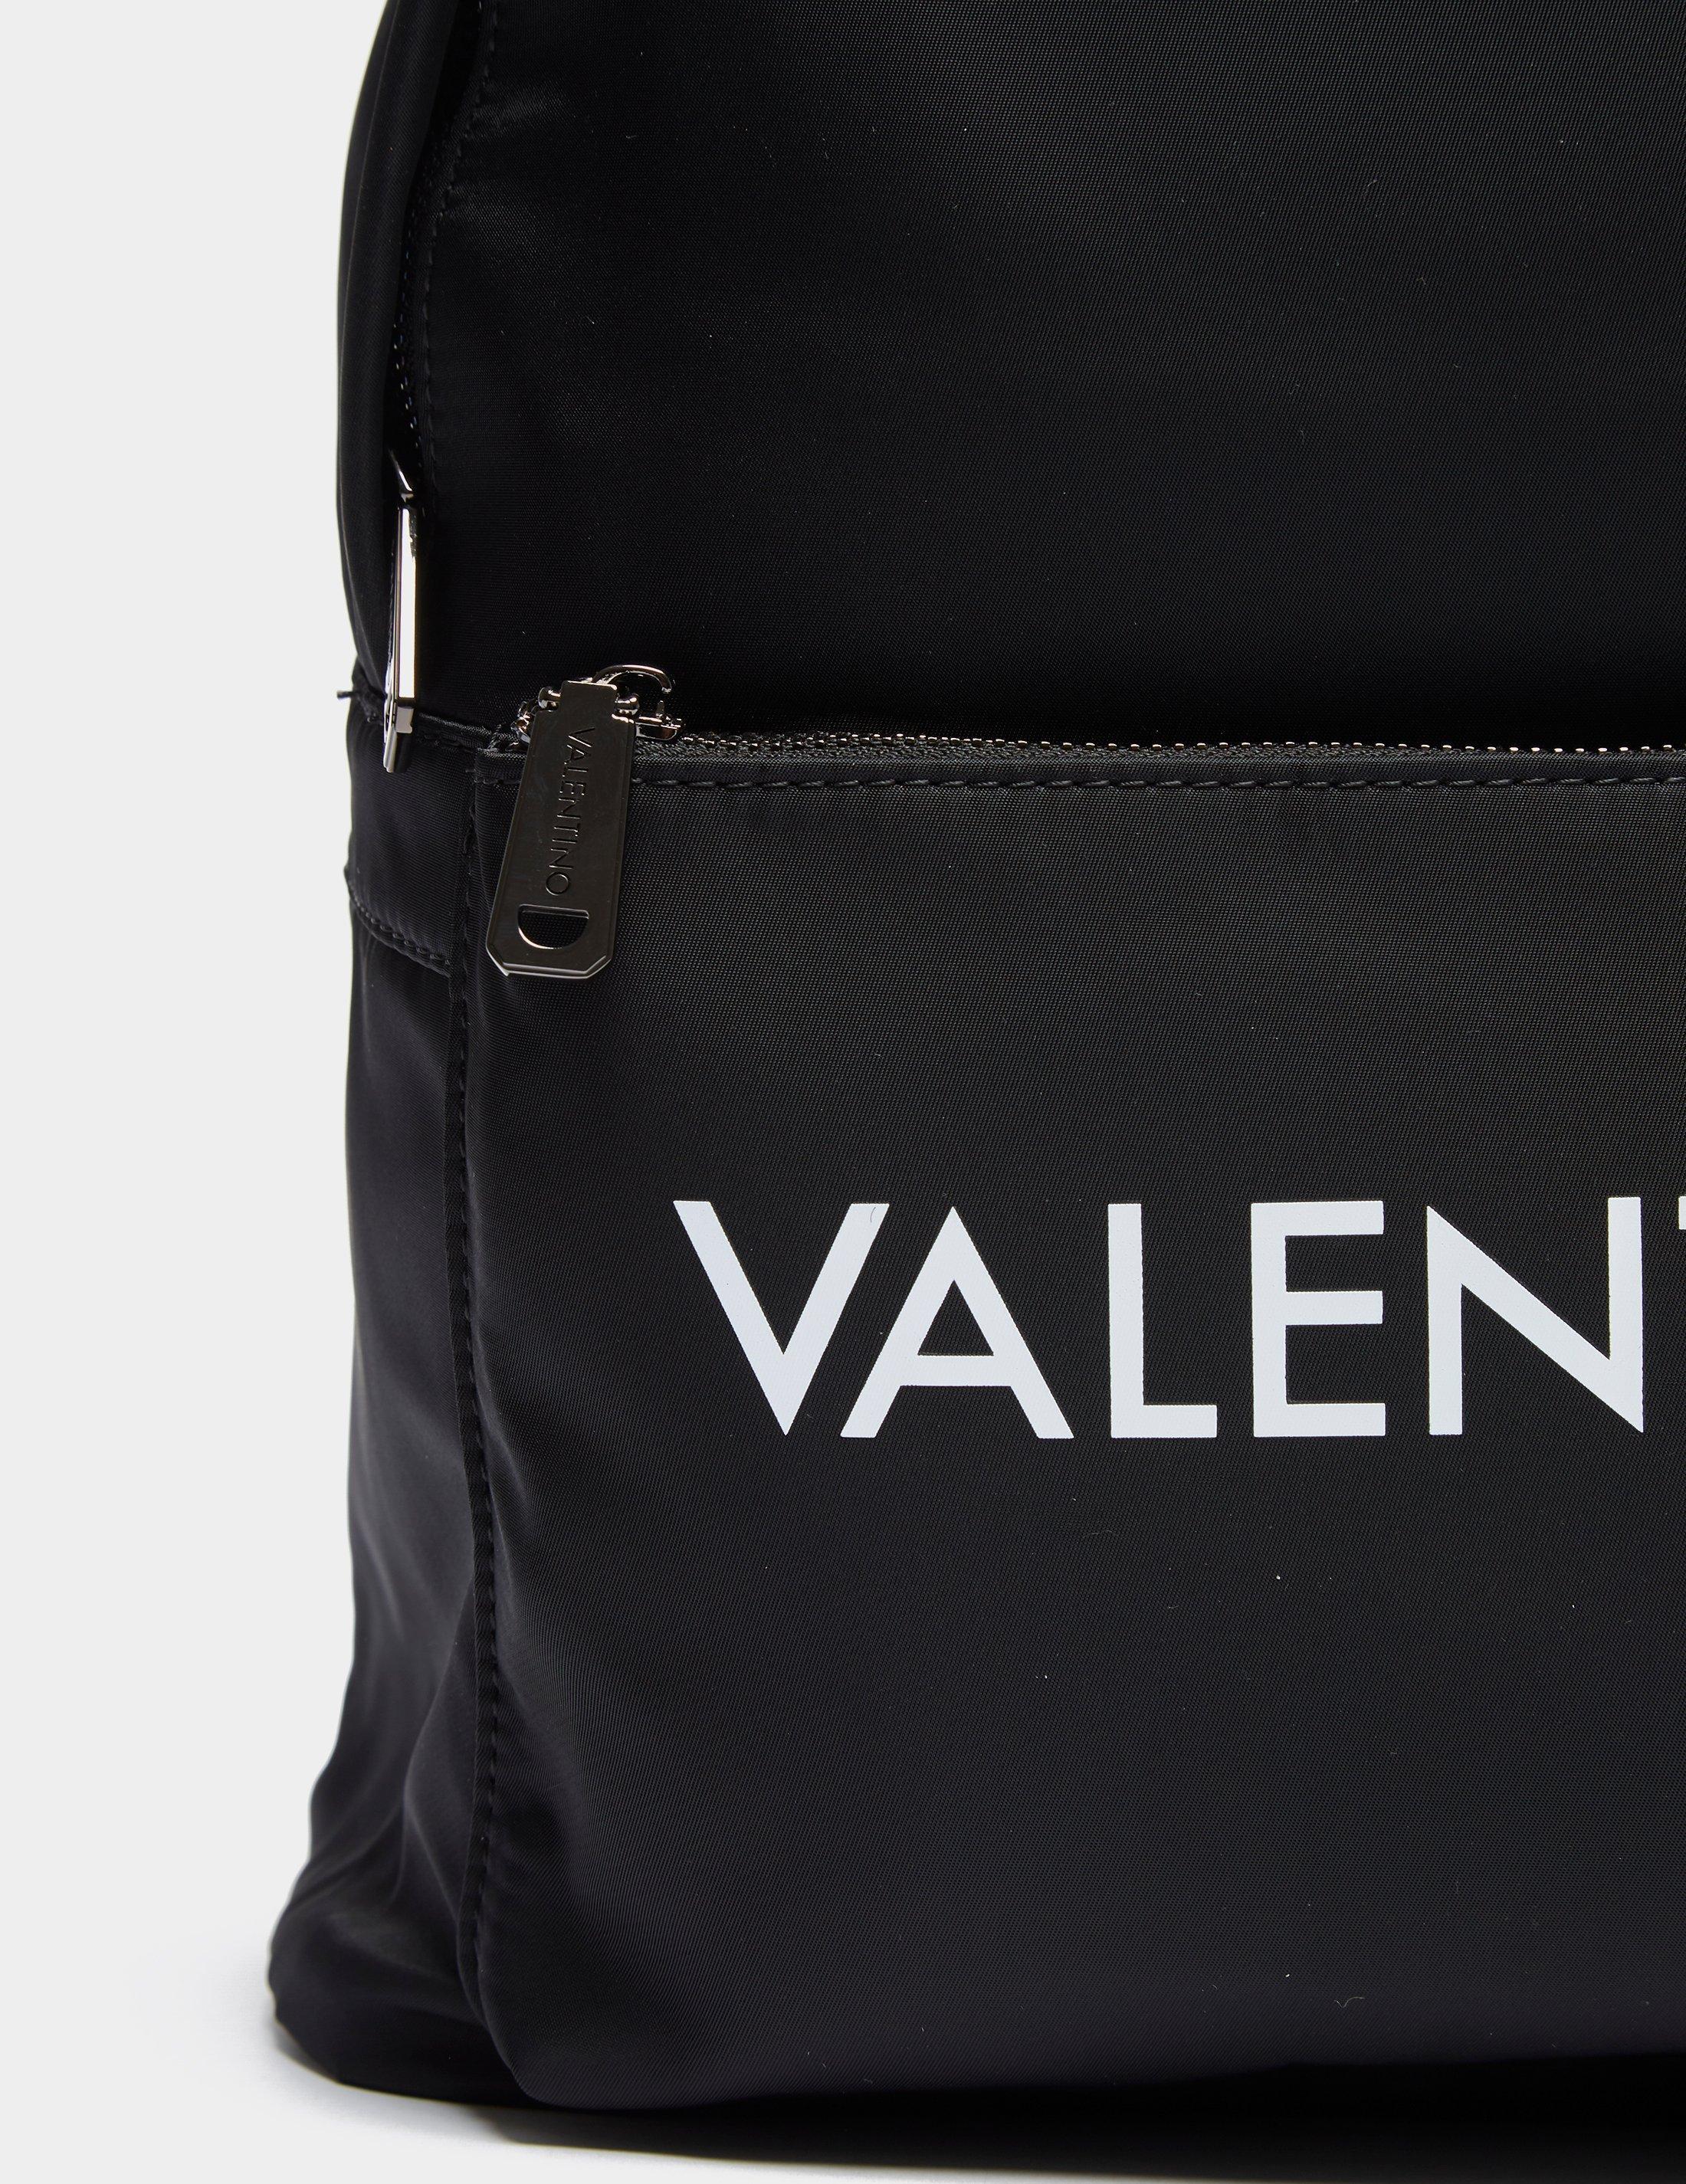 Valentino By Mario Valentino Kylo Backpack Black/black for Men - Lyst